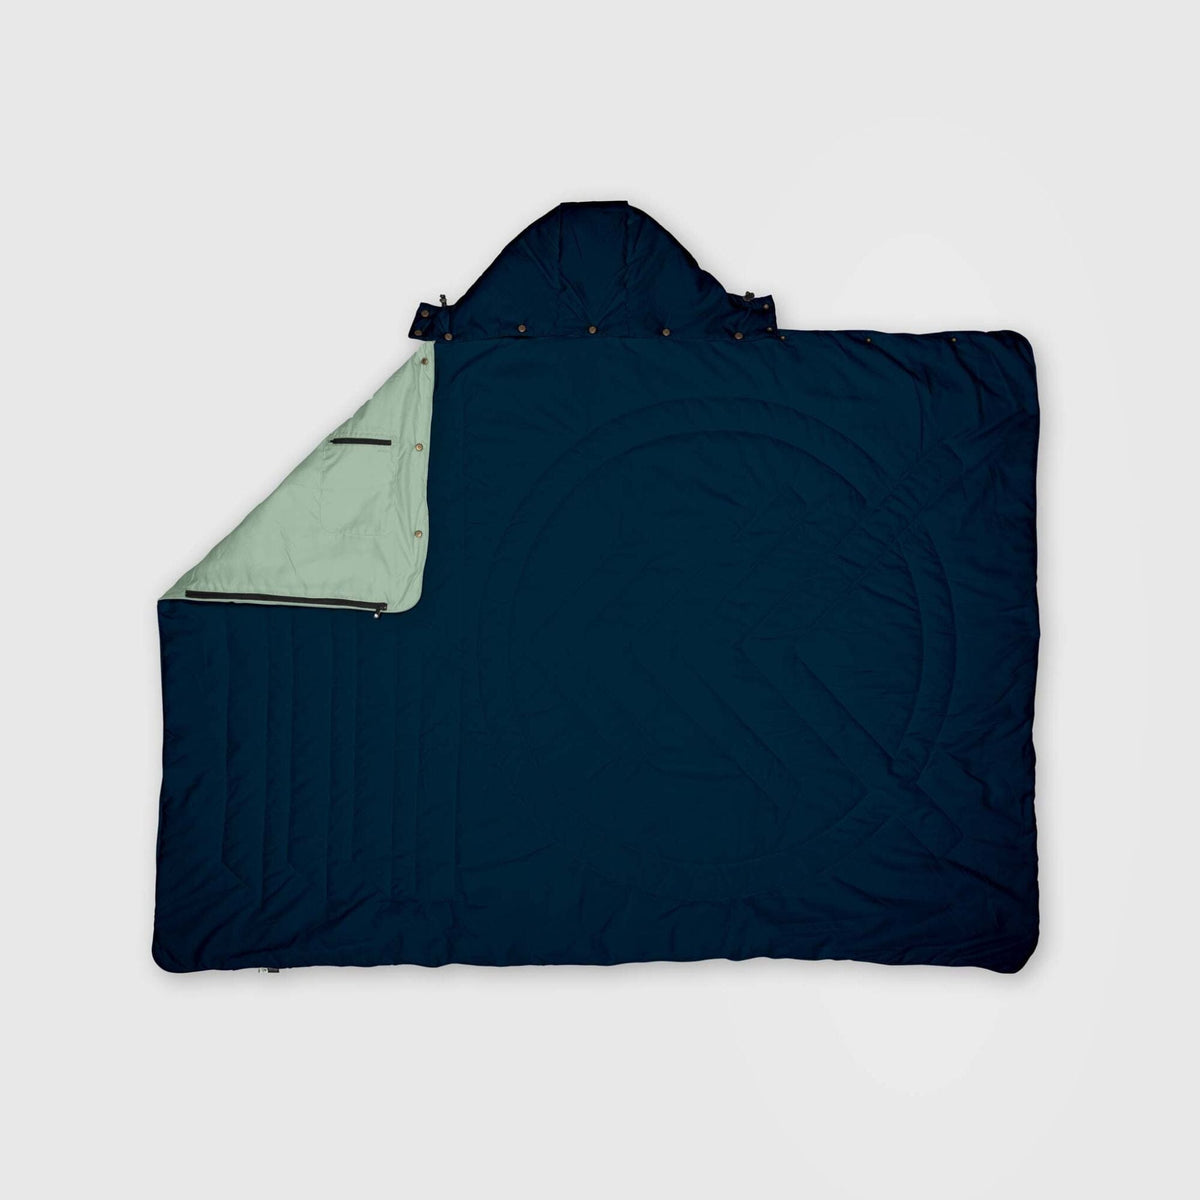 VOITED Recycled Ripstop Travel Blanket - Ocean Navy/Cameo Green Blankets VOITED 